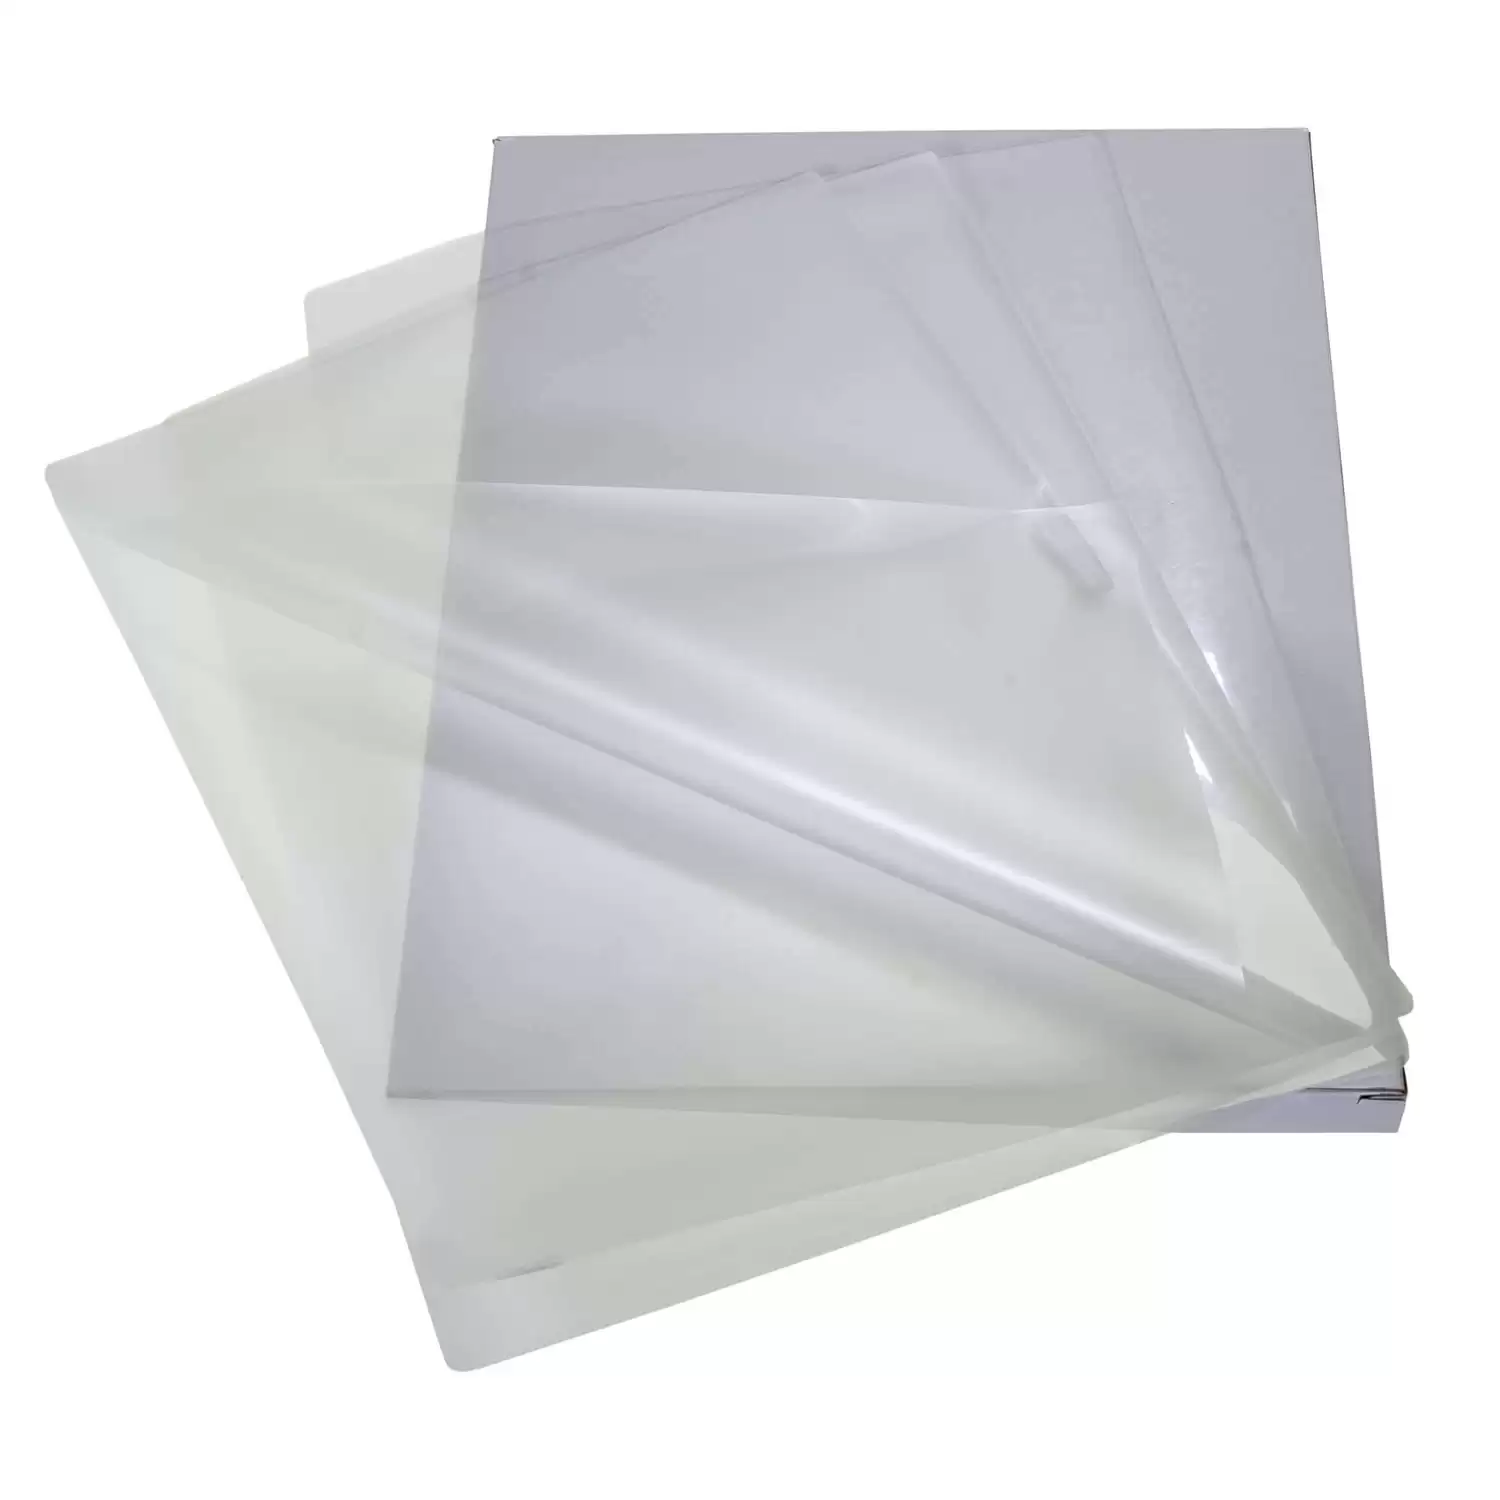 Writy A4 Laminating Pouches 100 Pack - Gompels - Care & Nursery